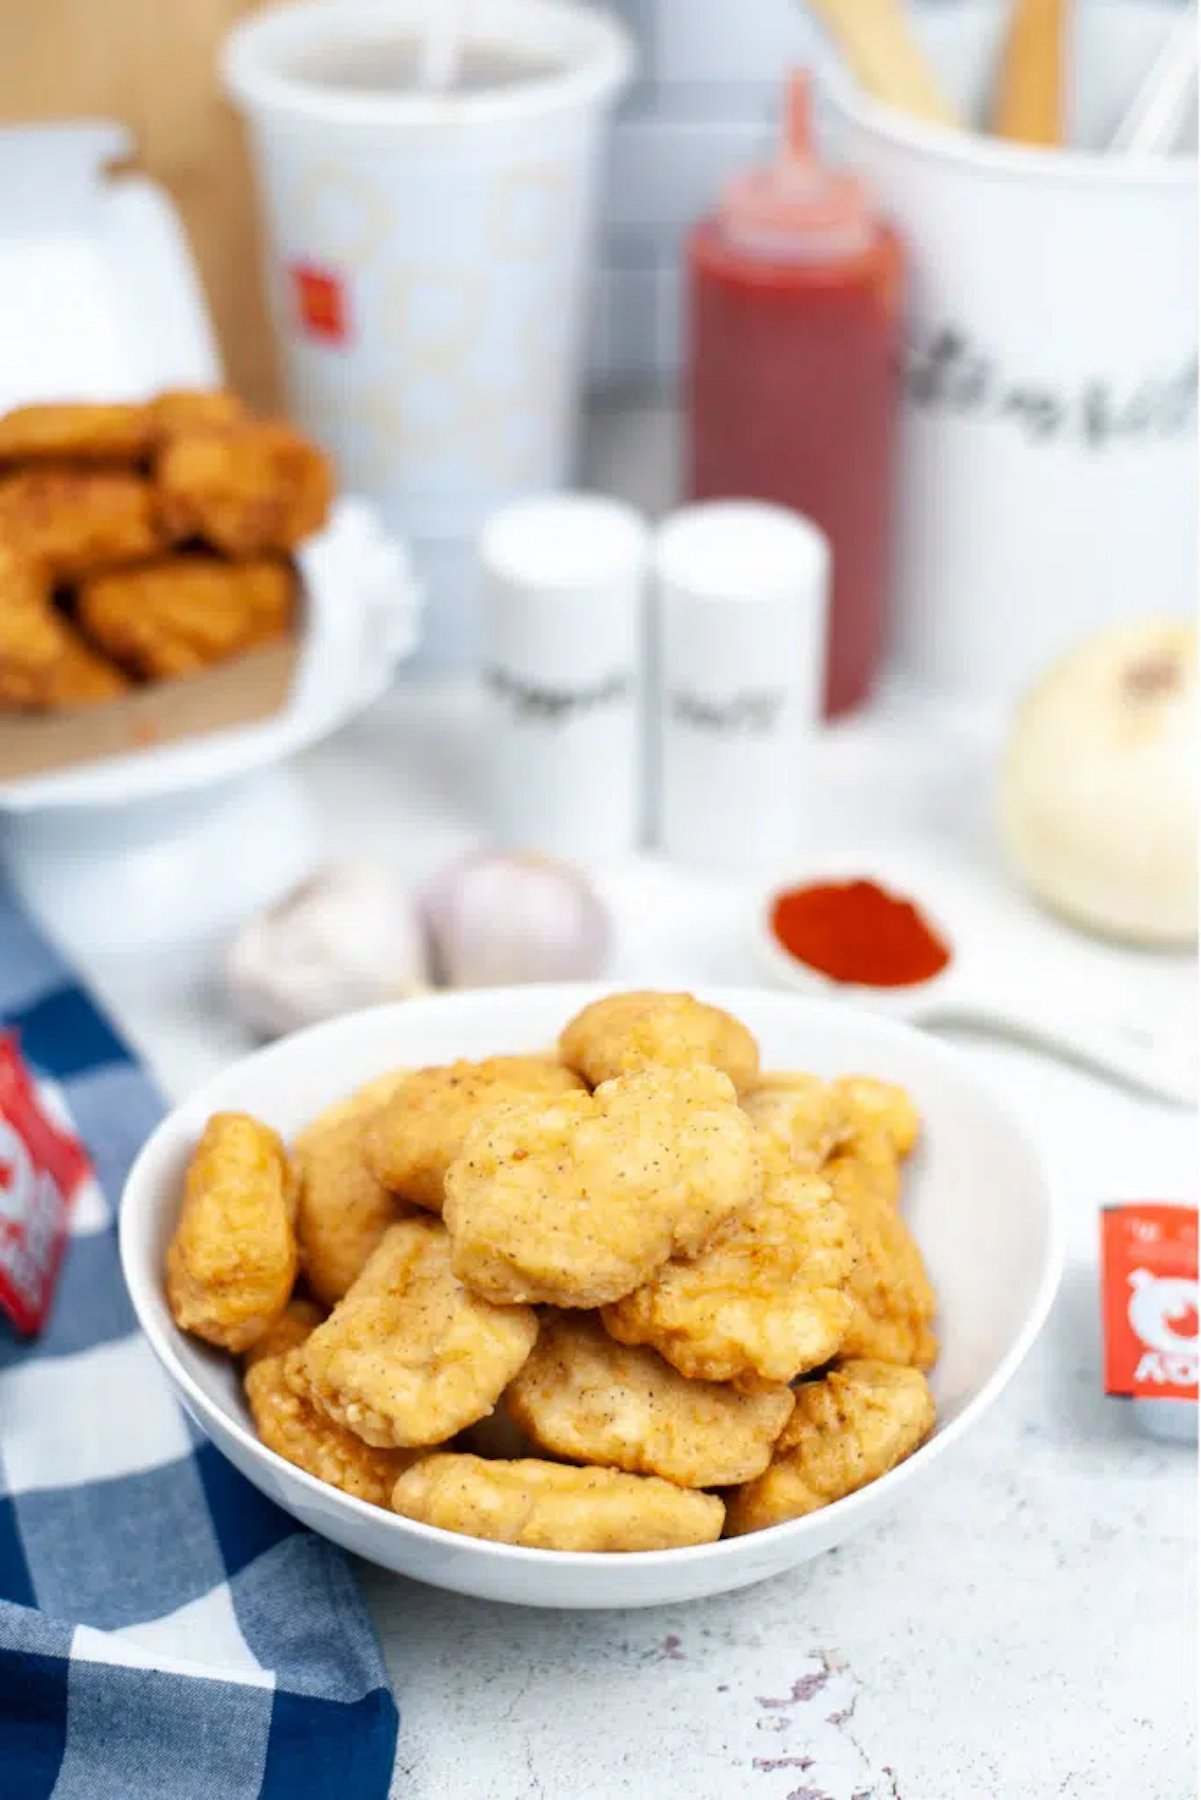 A bowl filled with homemade McDonald's chicken nuggets. BBQ sauce and a soft drink are out of focus in the background.